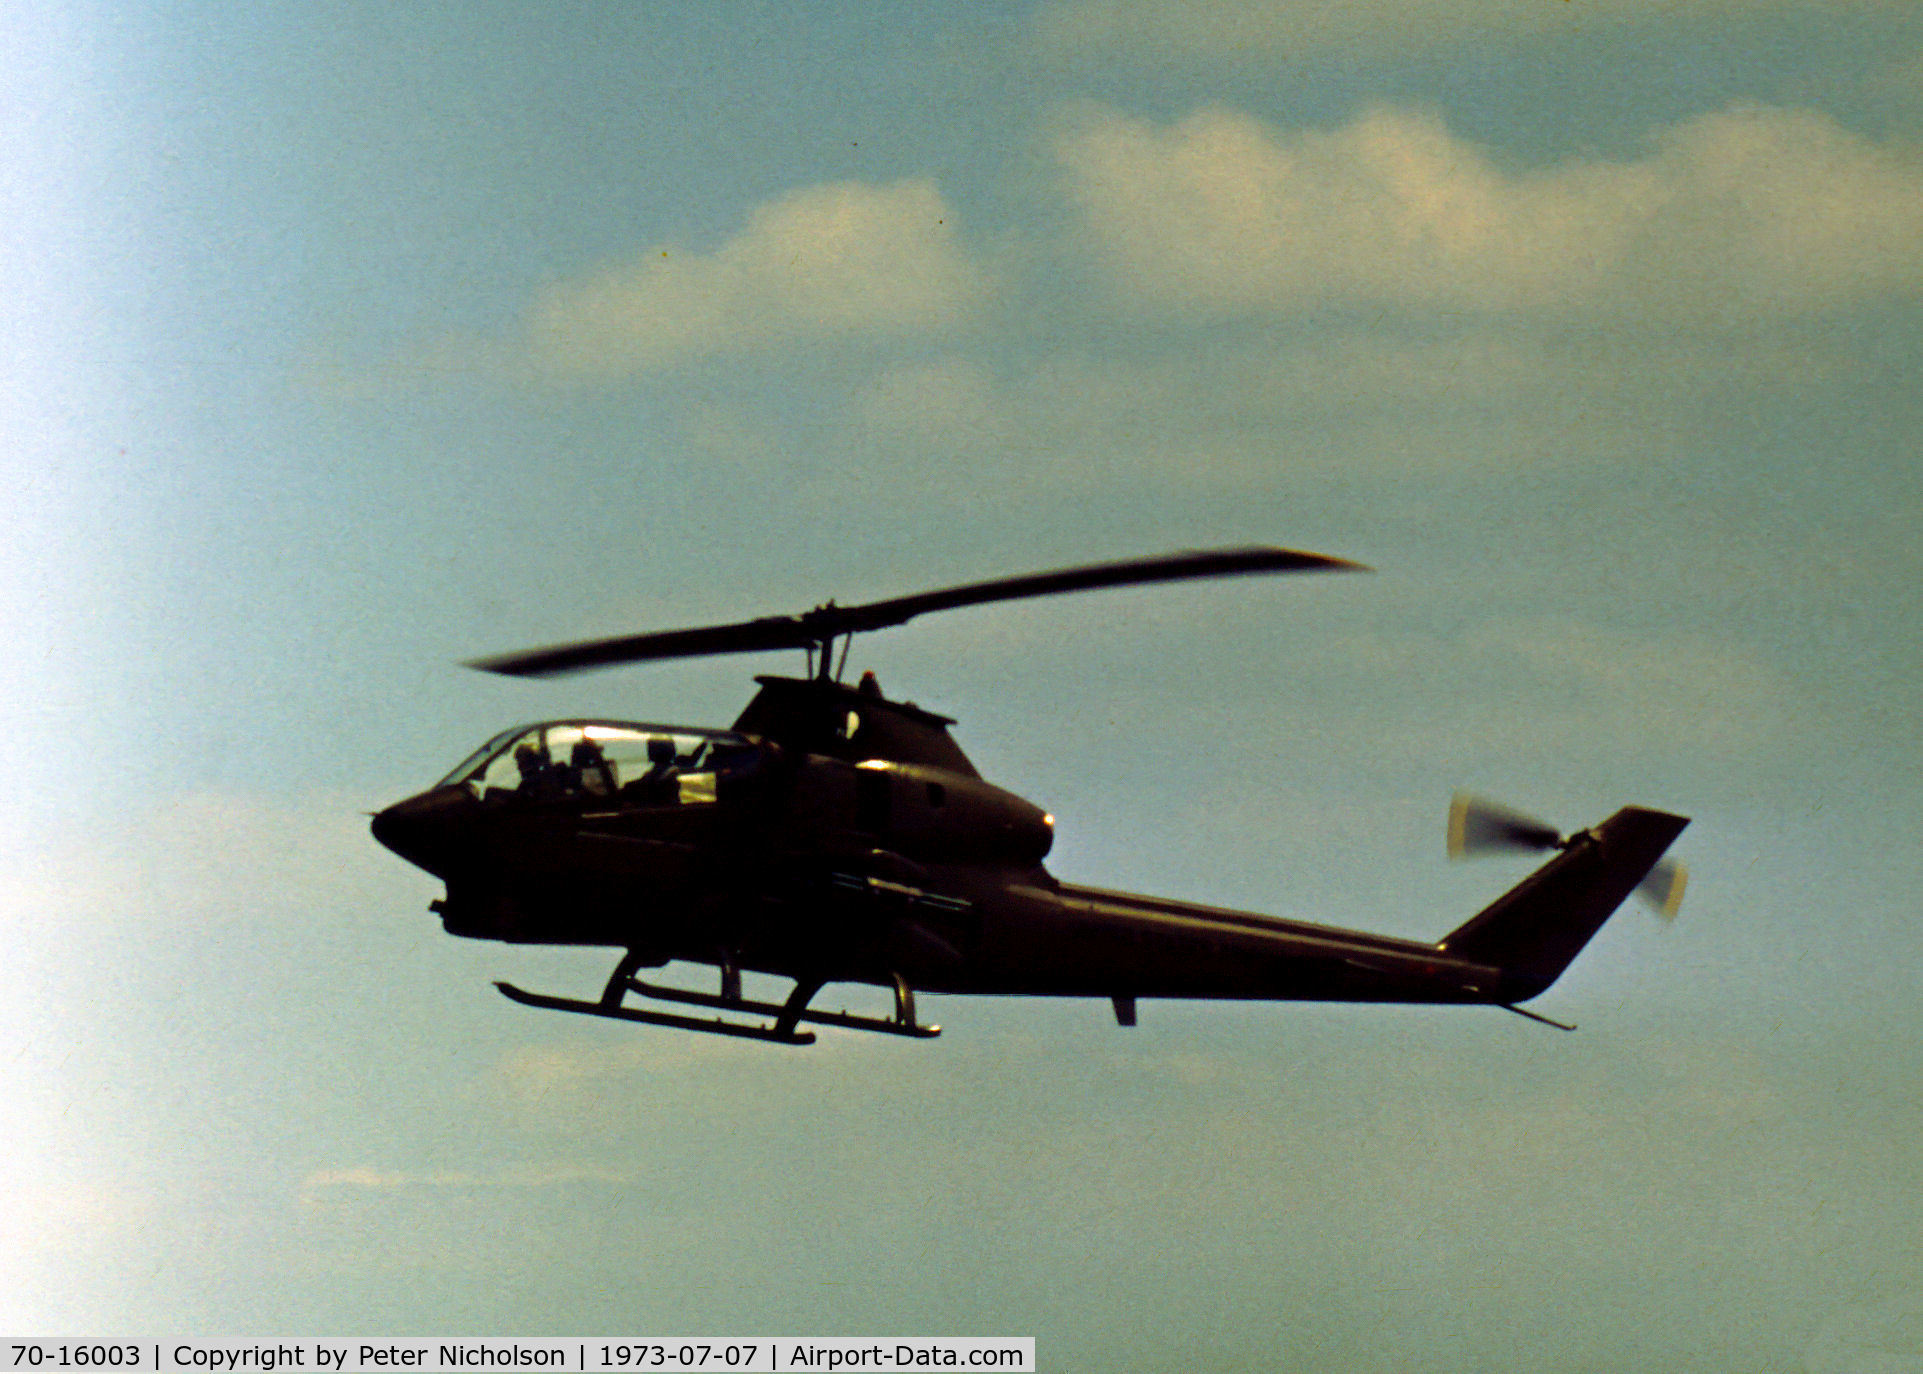 70-16003, 1970 Bell AH-1G Cobra C/N 20947, AH-1G Cobra of the US Army's 71st Aviation Company performing at the 1973 Intnl Air Tattoo at RAF Greenham Common.